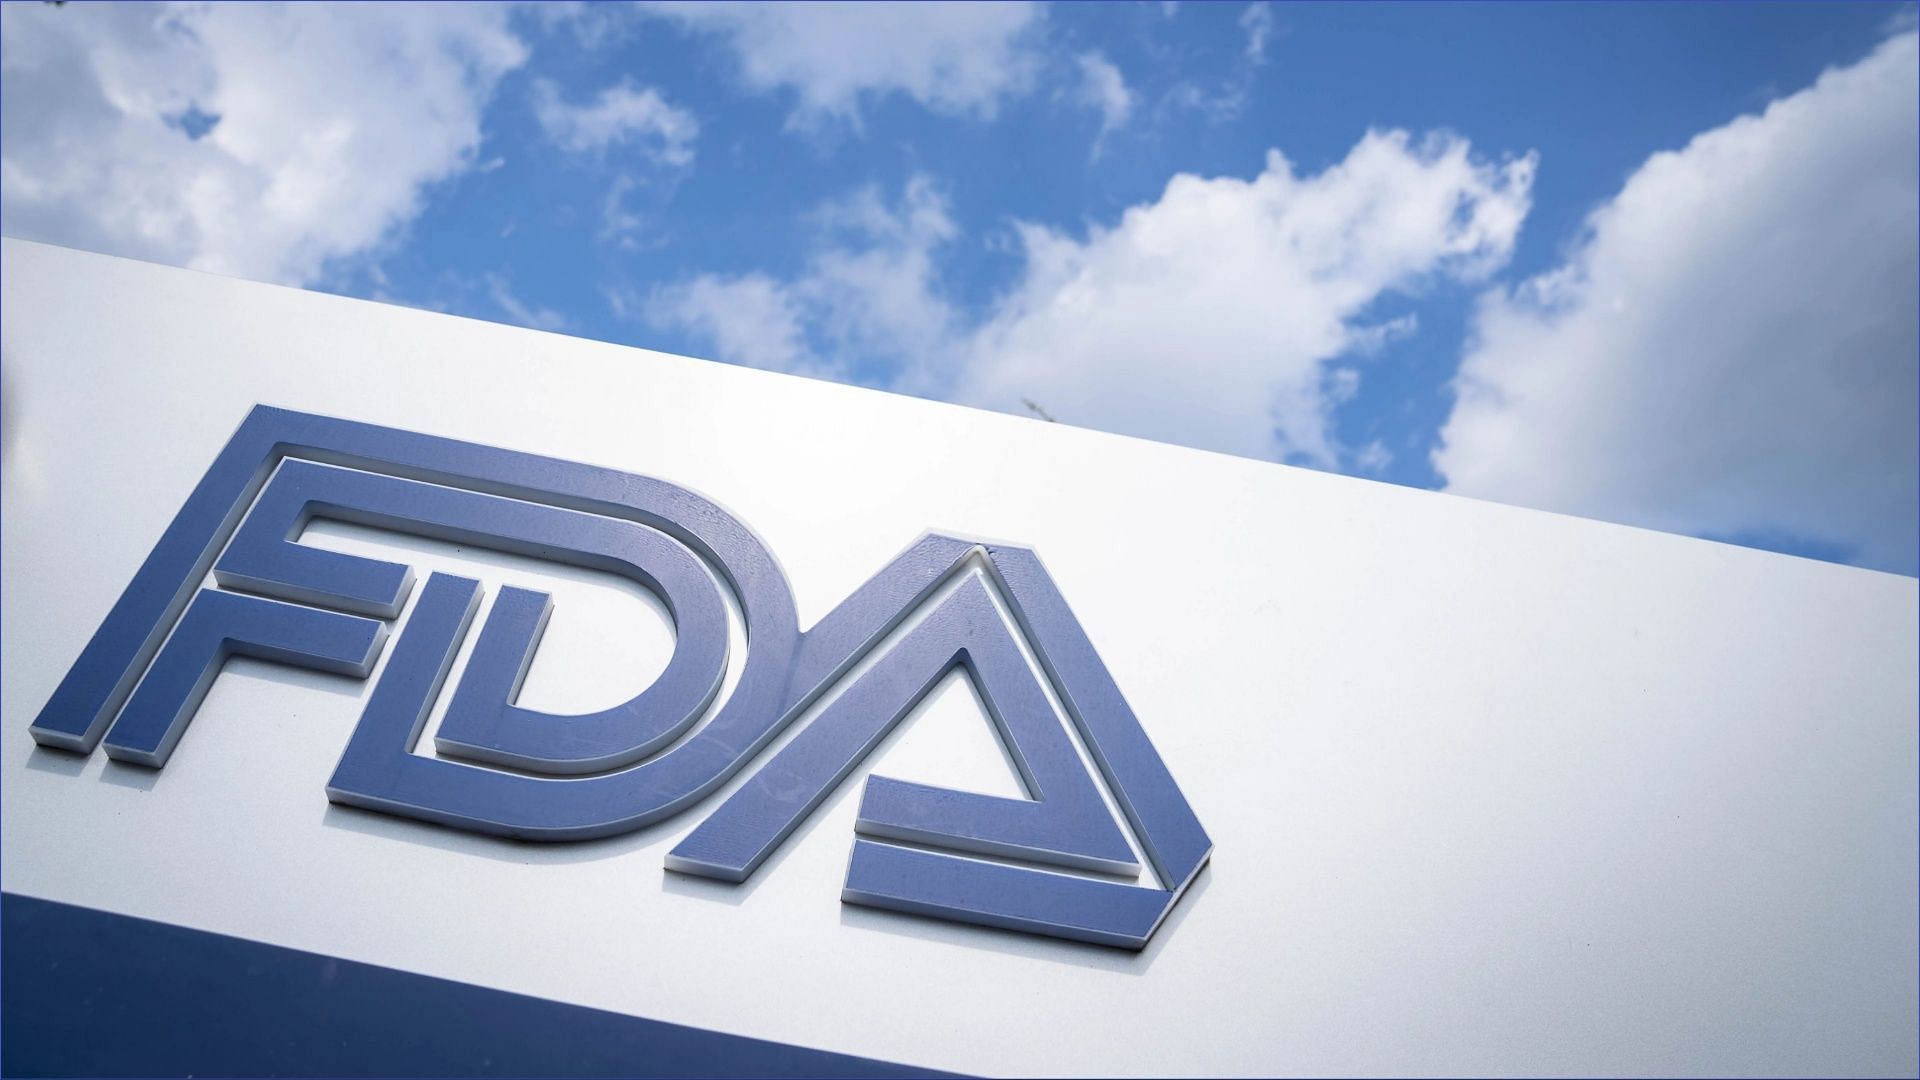 The FDA-regulated products recalled by the Inmar Supply Chain were only sold to salvage buyers (Image via Sarah Silbiger / Getty Images)